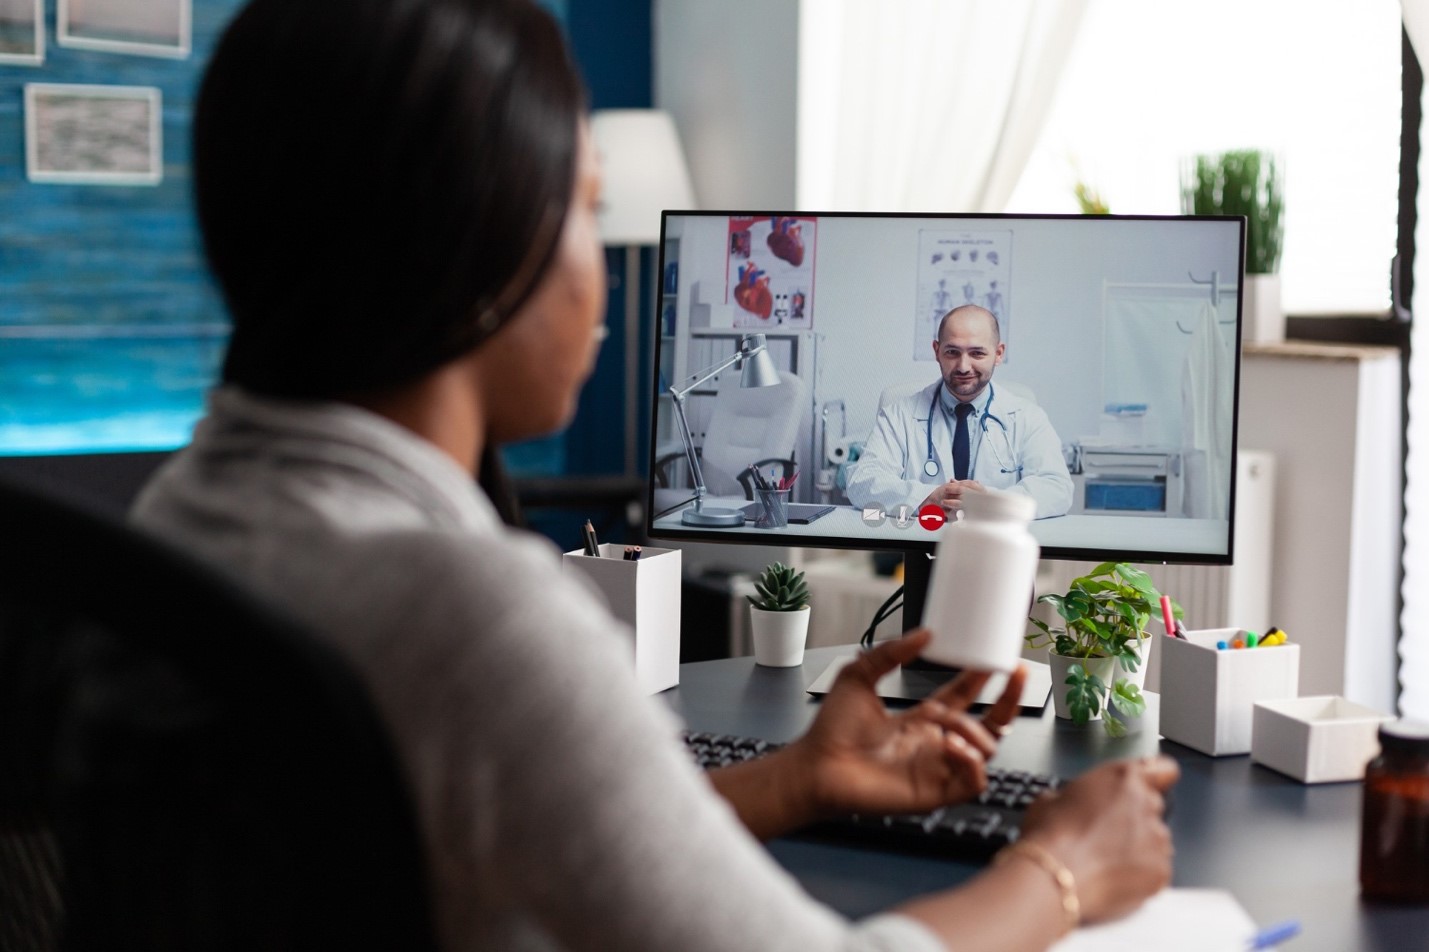 Woman holding medicine bottle on a video call with doctor on computer